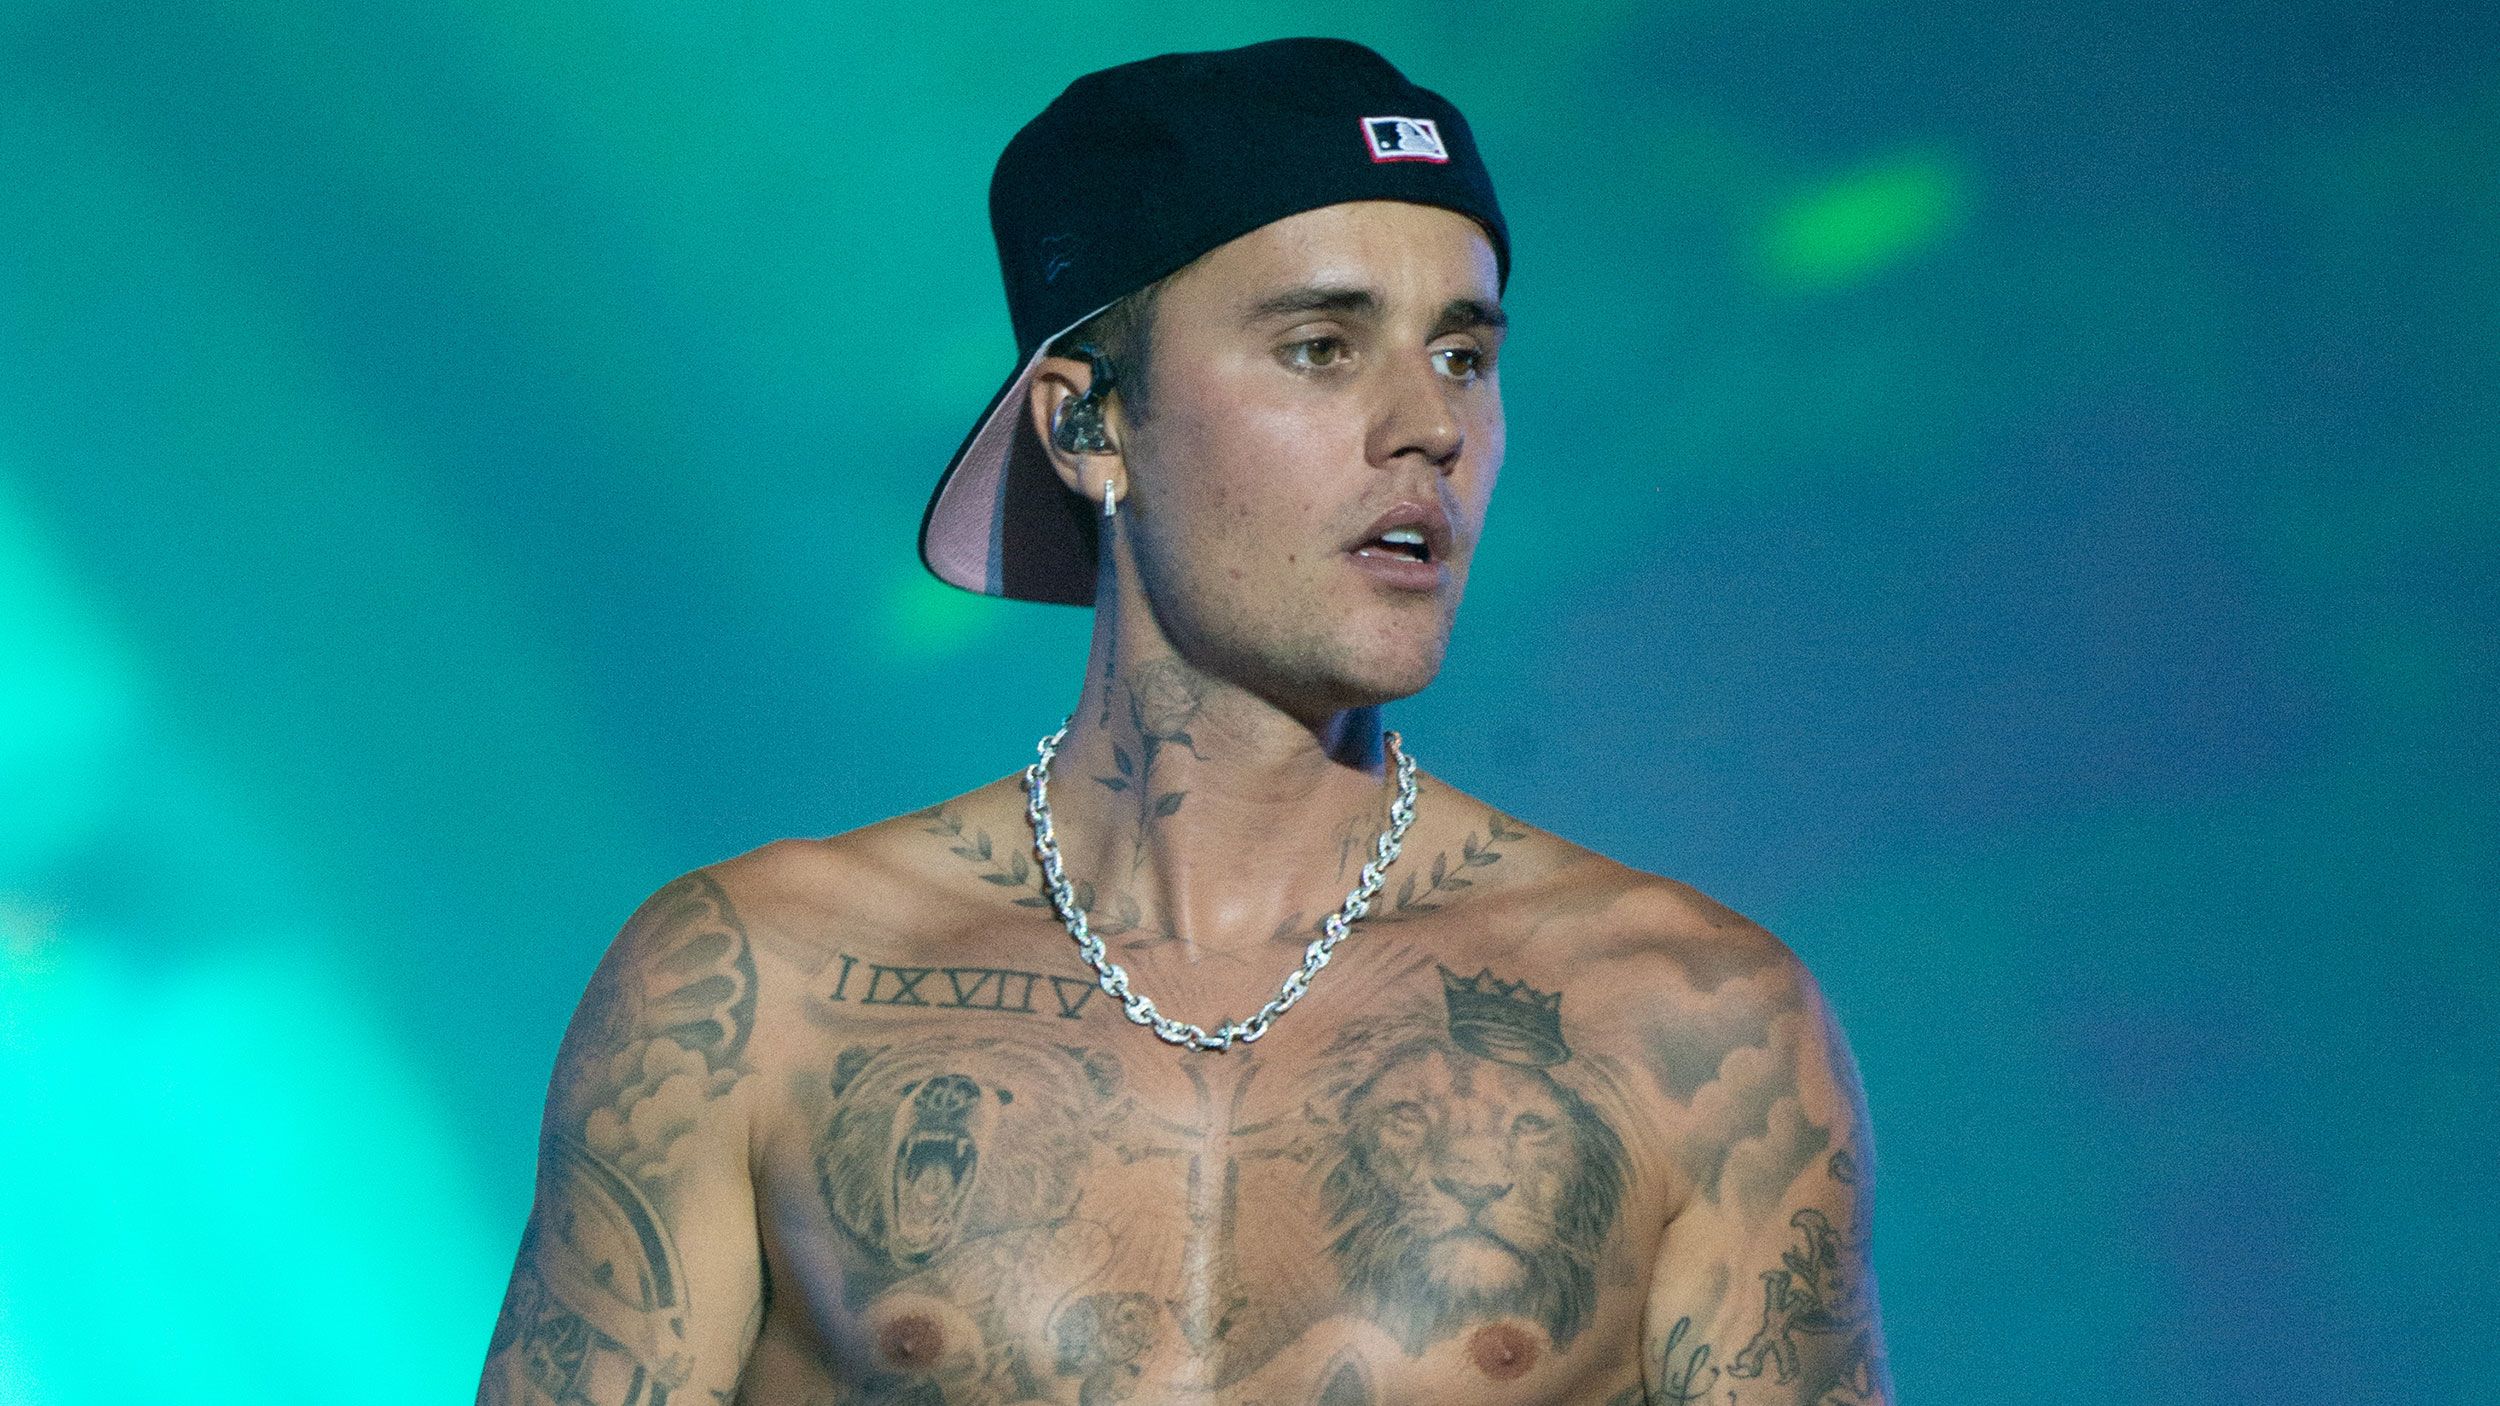 Justin Bieber's Justice World Tour has 'ended' until at least March 2023